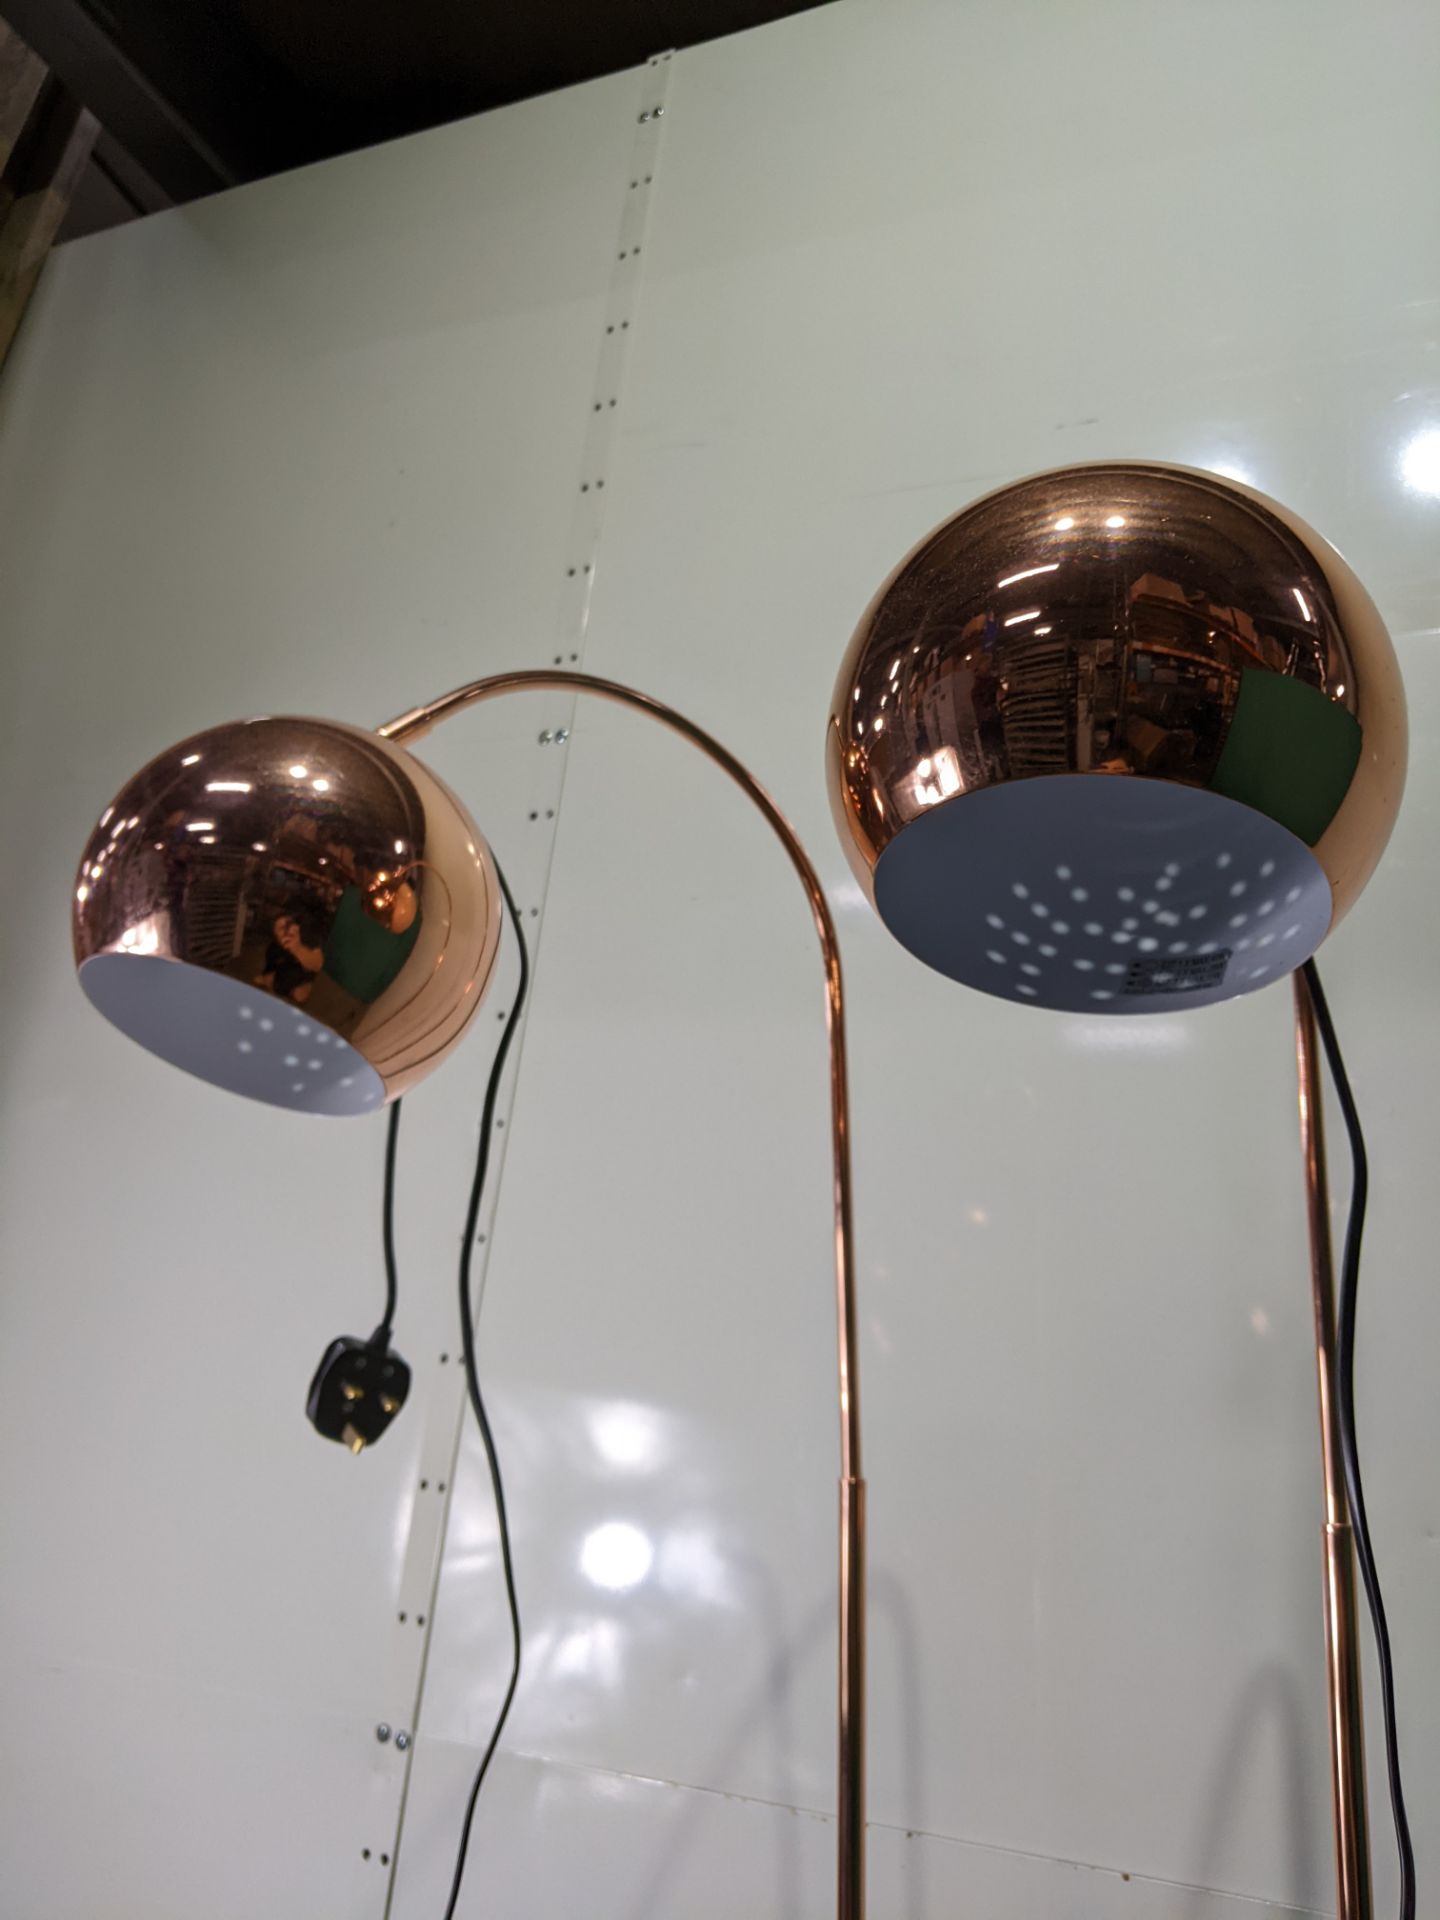 2 x Copper Effect Floor Lamps w/ Marble Effect Base - Image 3 of 5